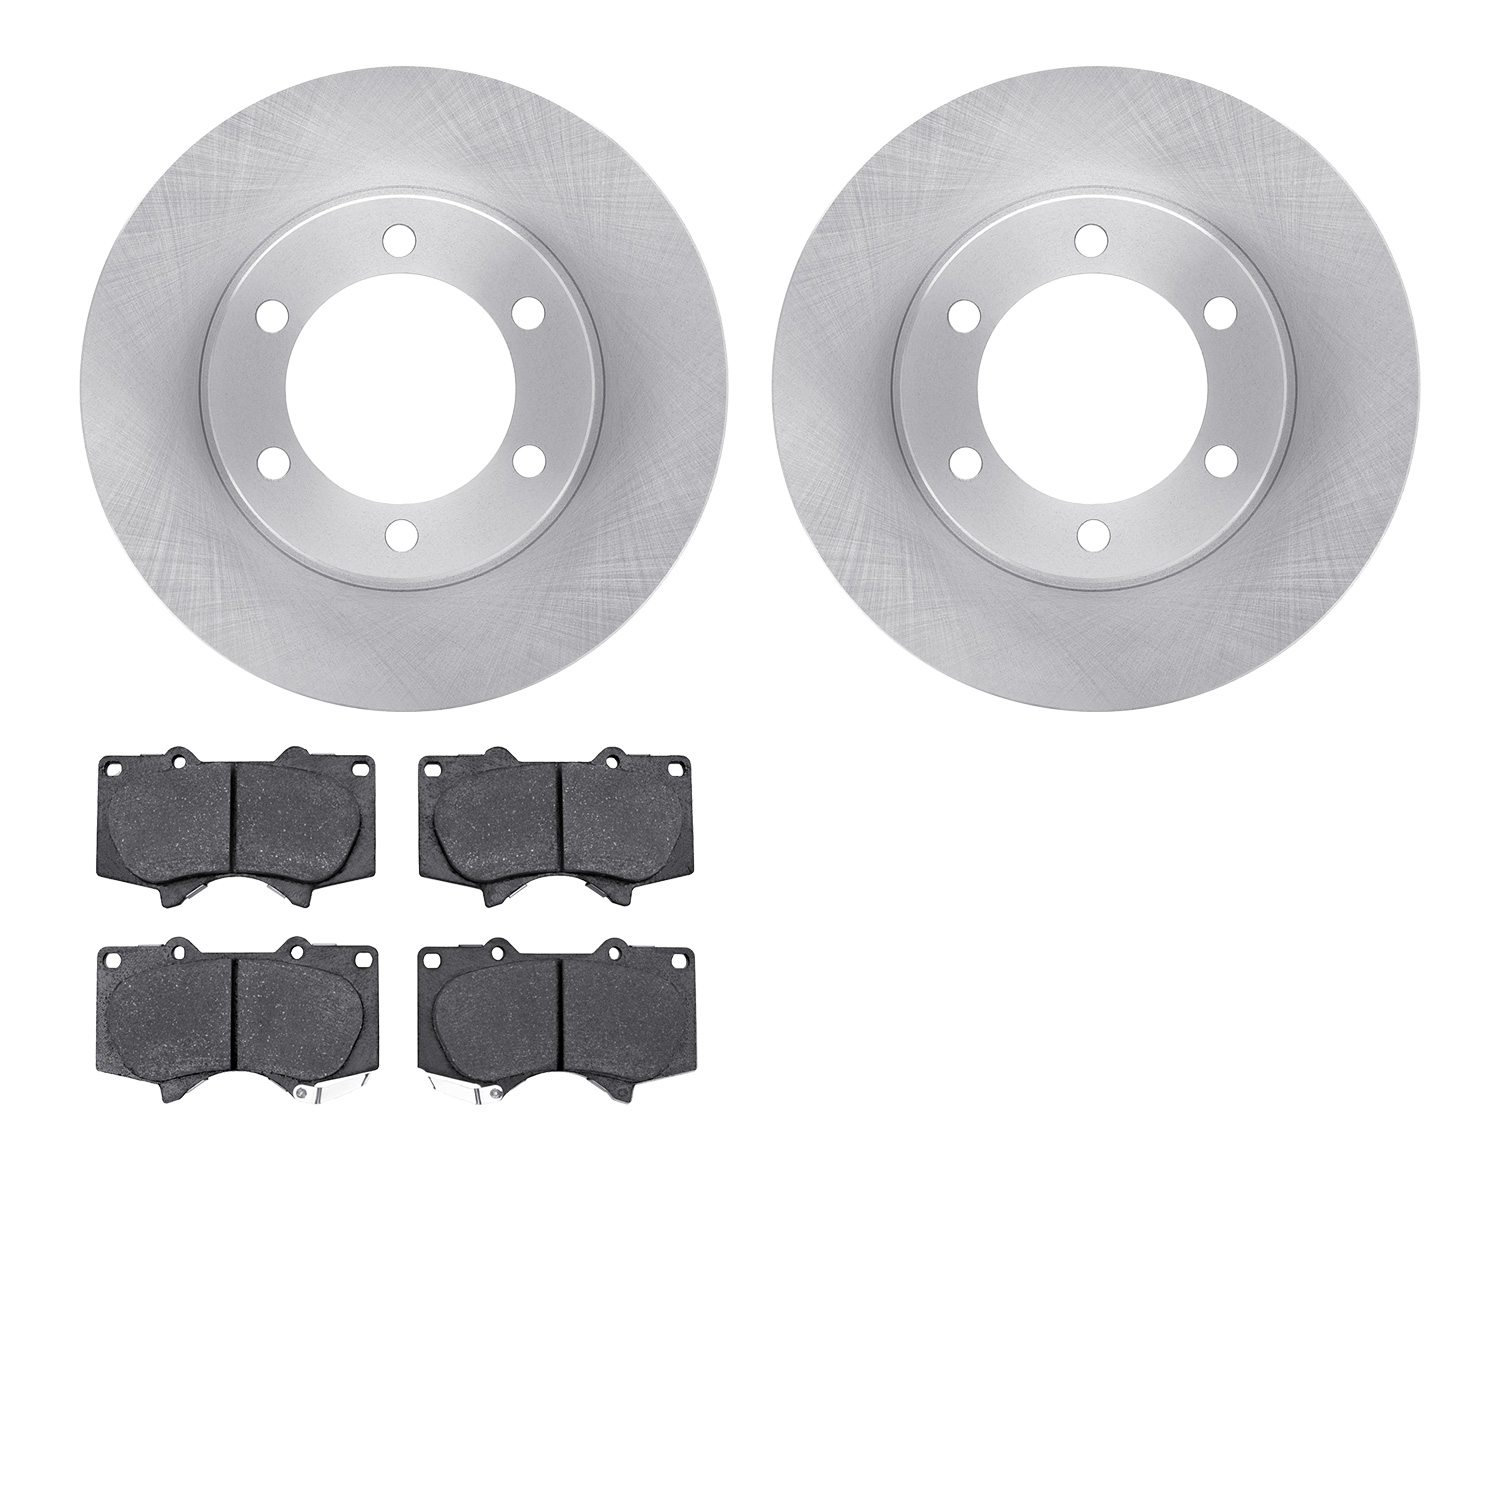 6402-76041 Brake Rotors with Ultimate-Duty Brake Pads, 2000-2007 Lexus/Toyota/Scion, Position: Front